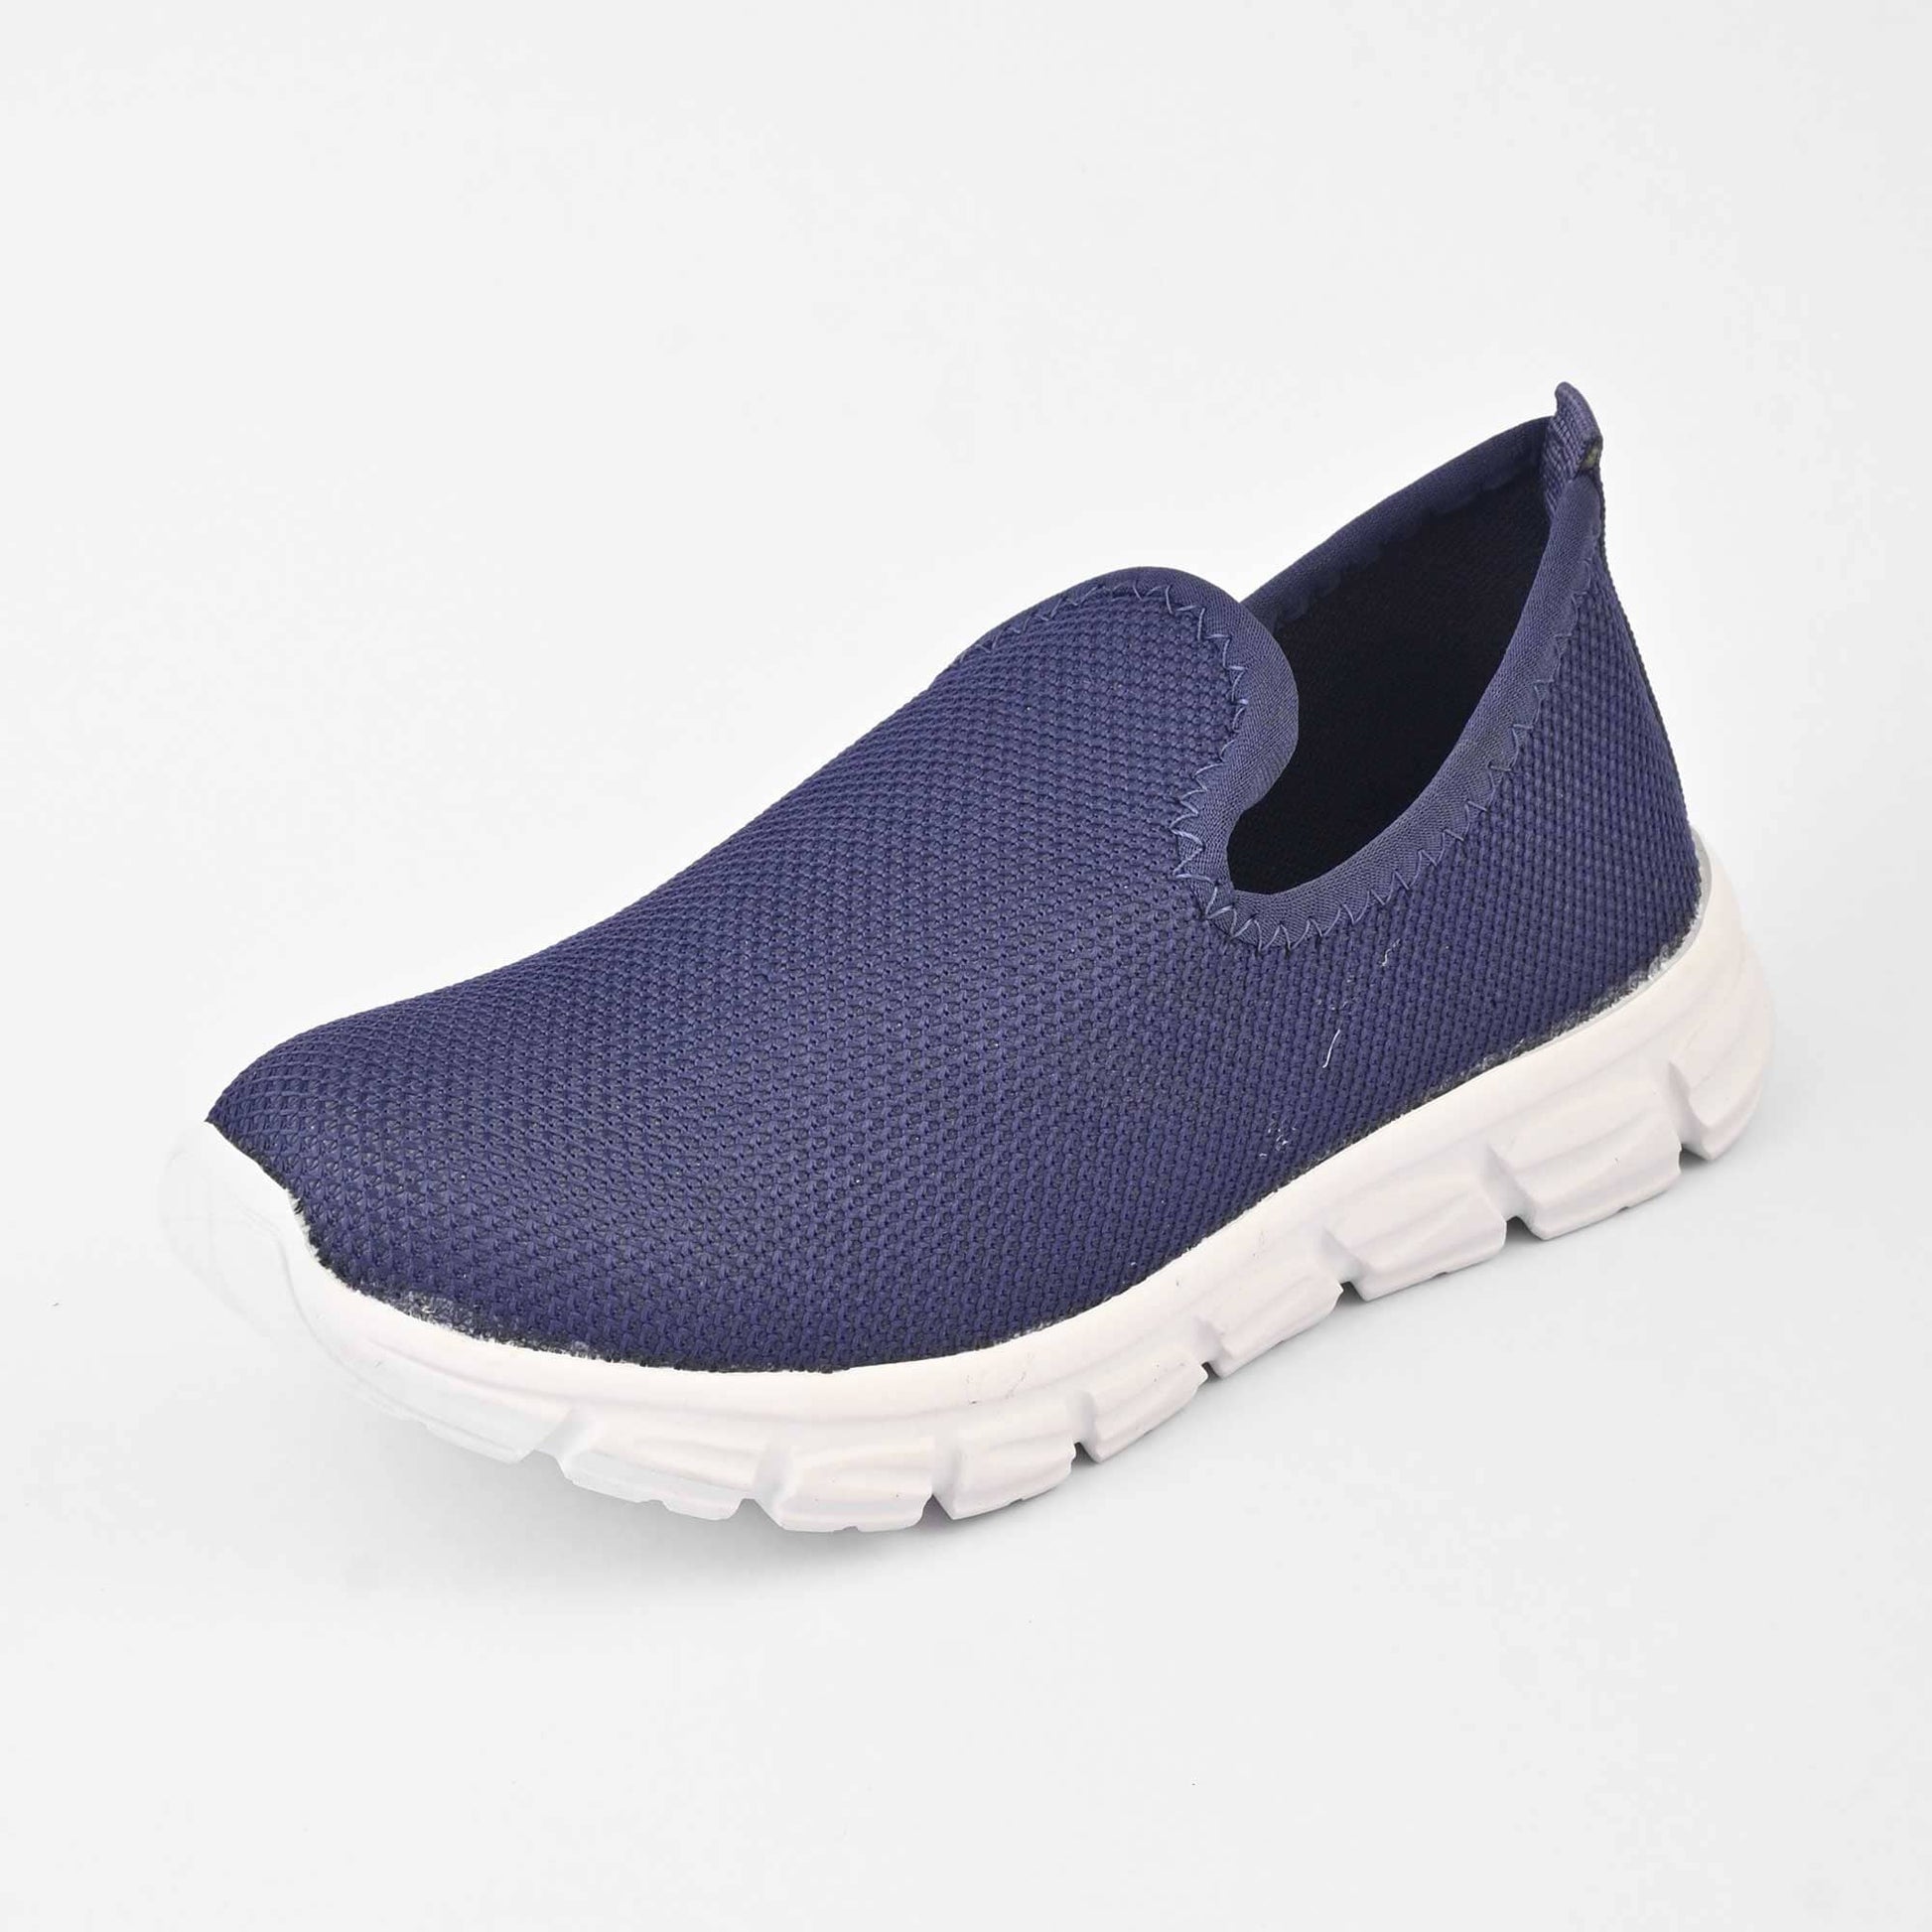 Tampa Performance Jogger Shoes Unisex Shoes SNAN Traders Navy EUR 39 